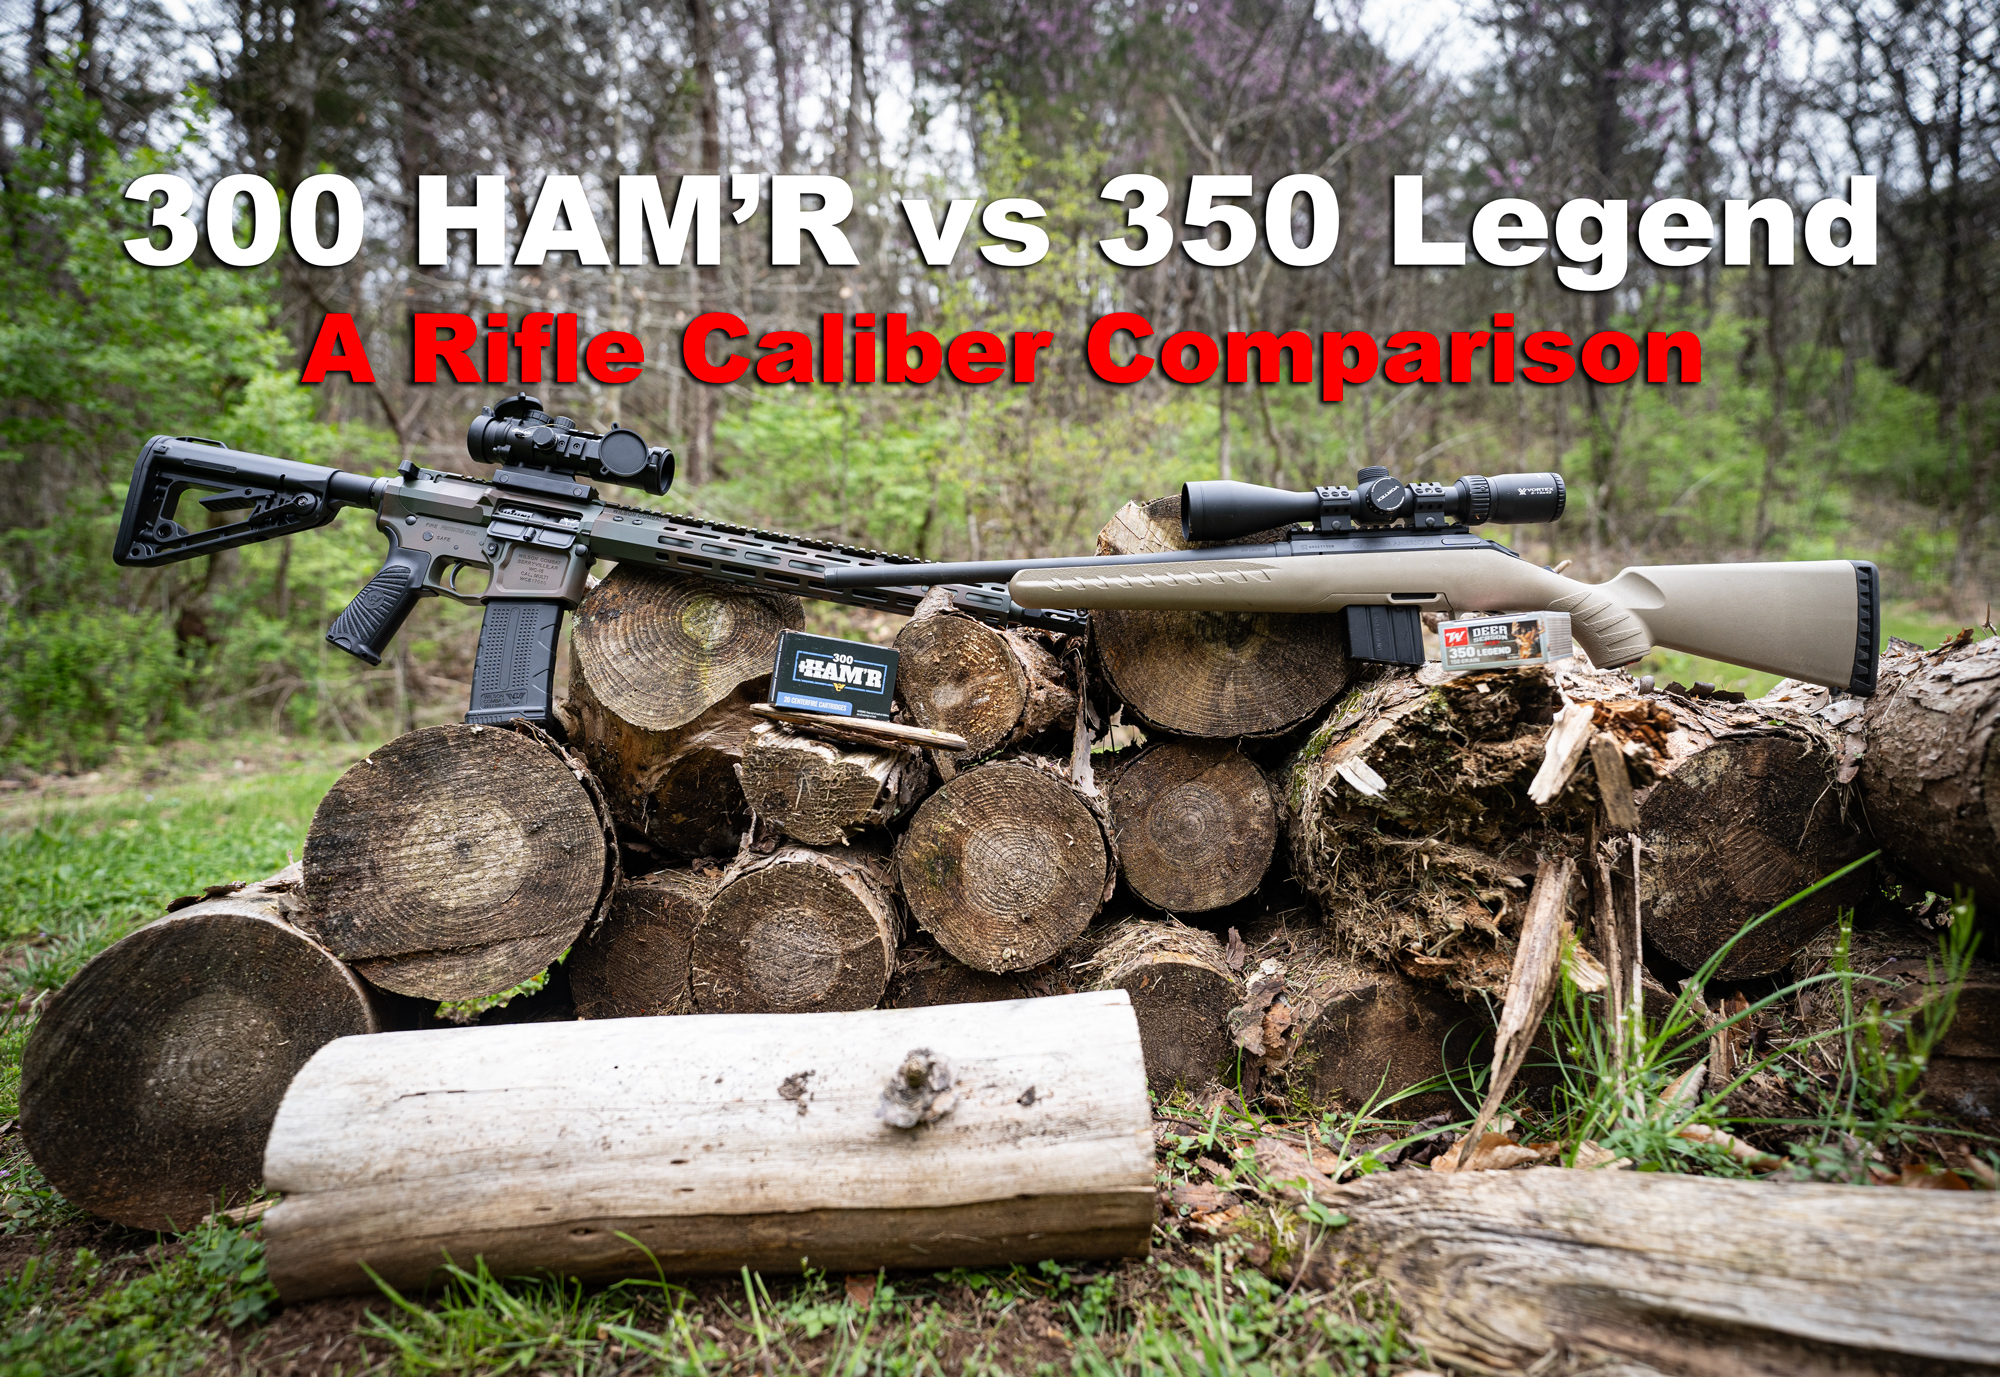 300 HAM'R vs 350 legend rifles and ammo at a shooting range